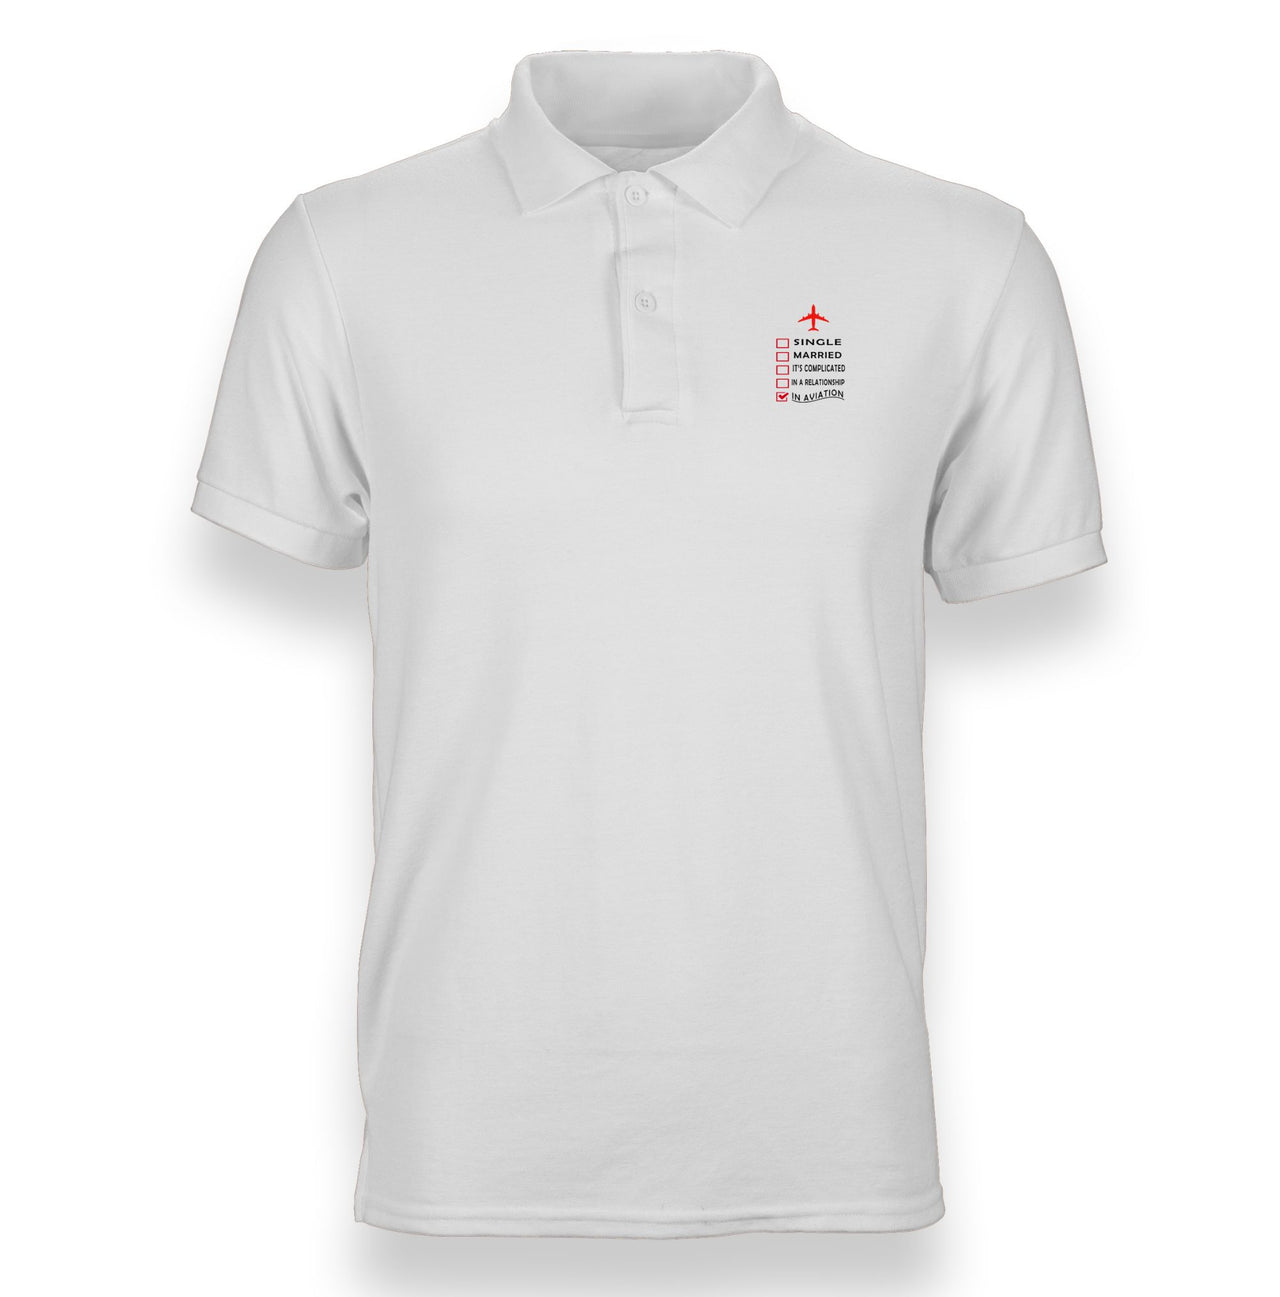 In Aviation Designed "WOMEN" Polo T-Shirts